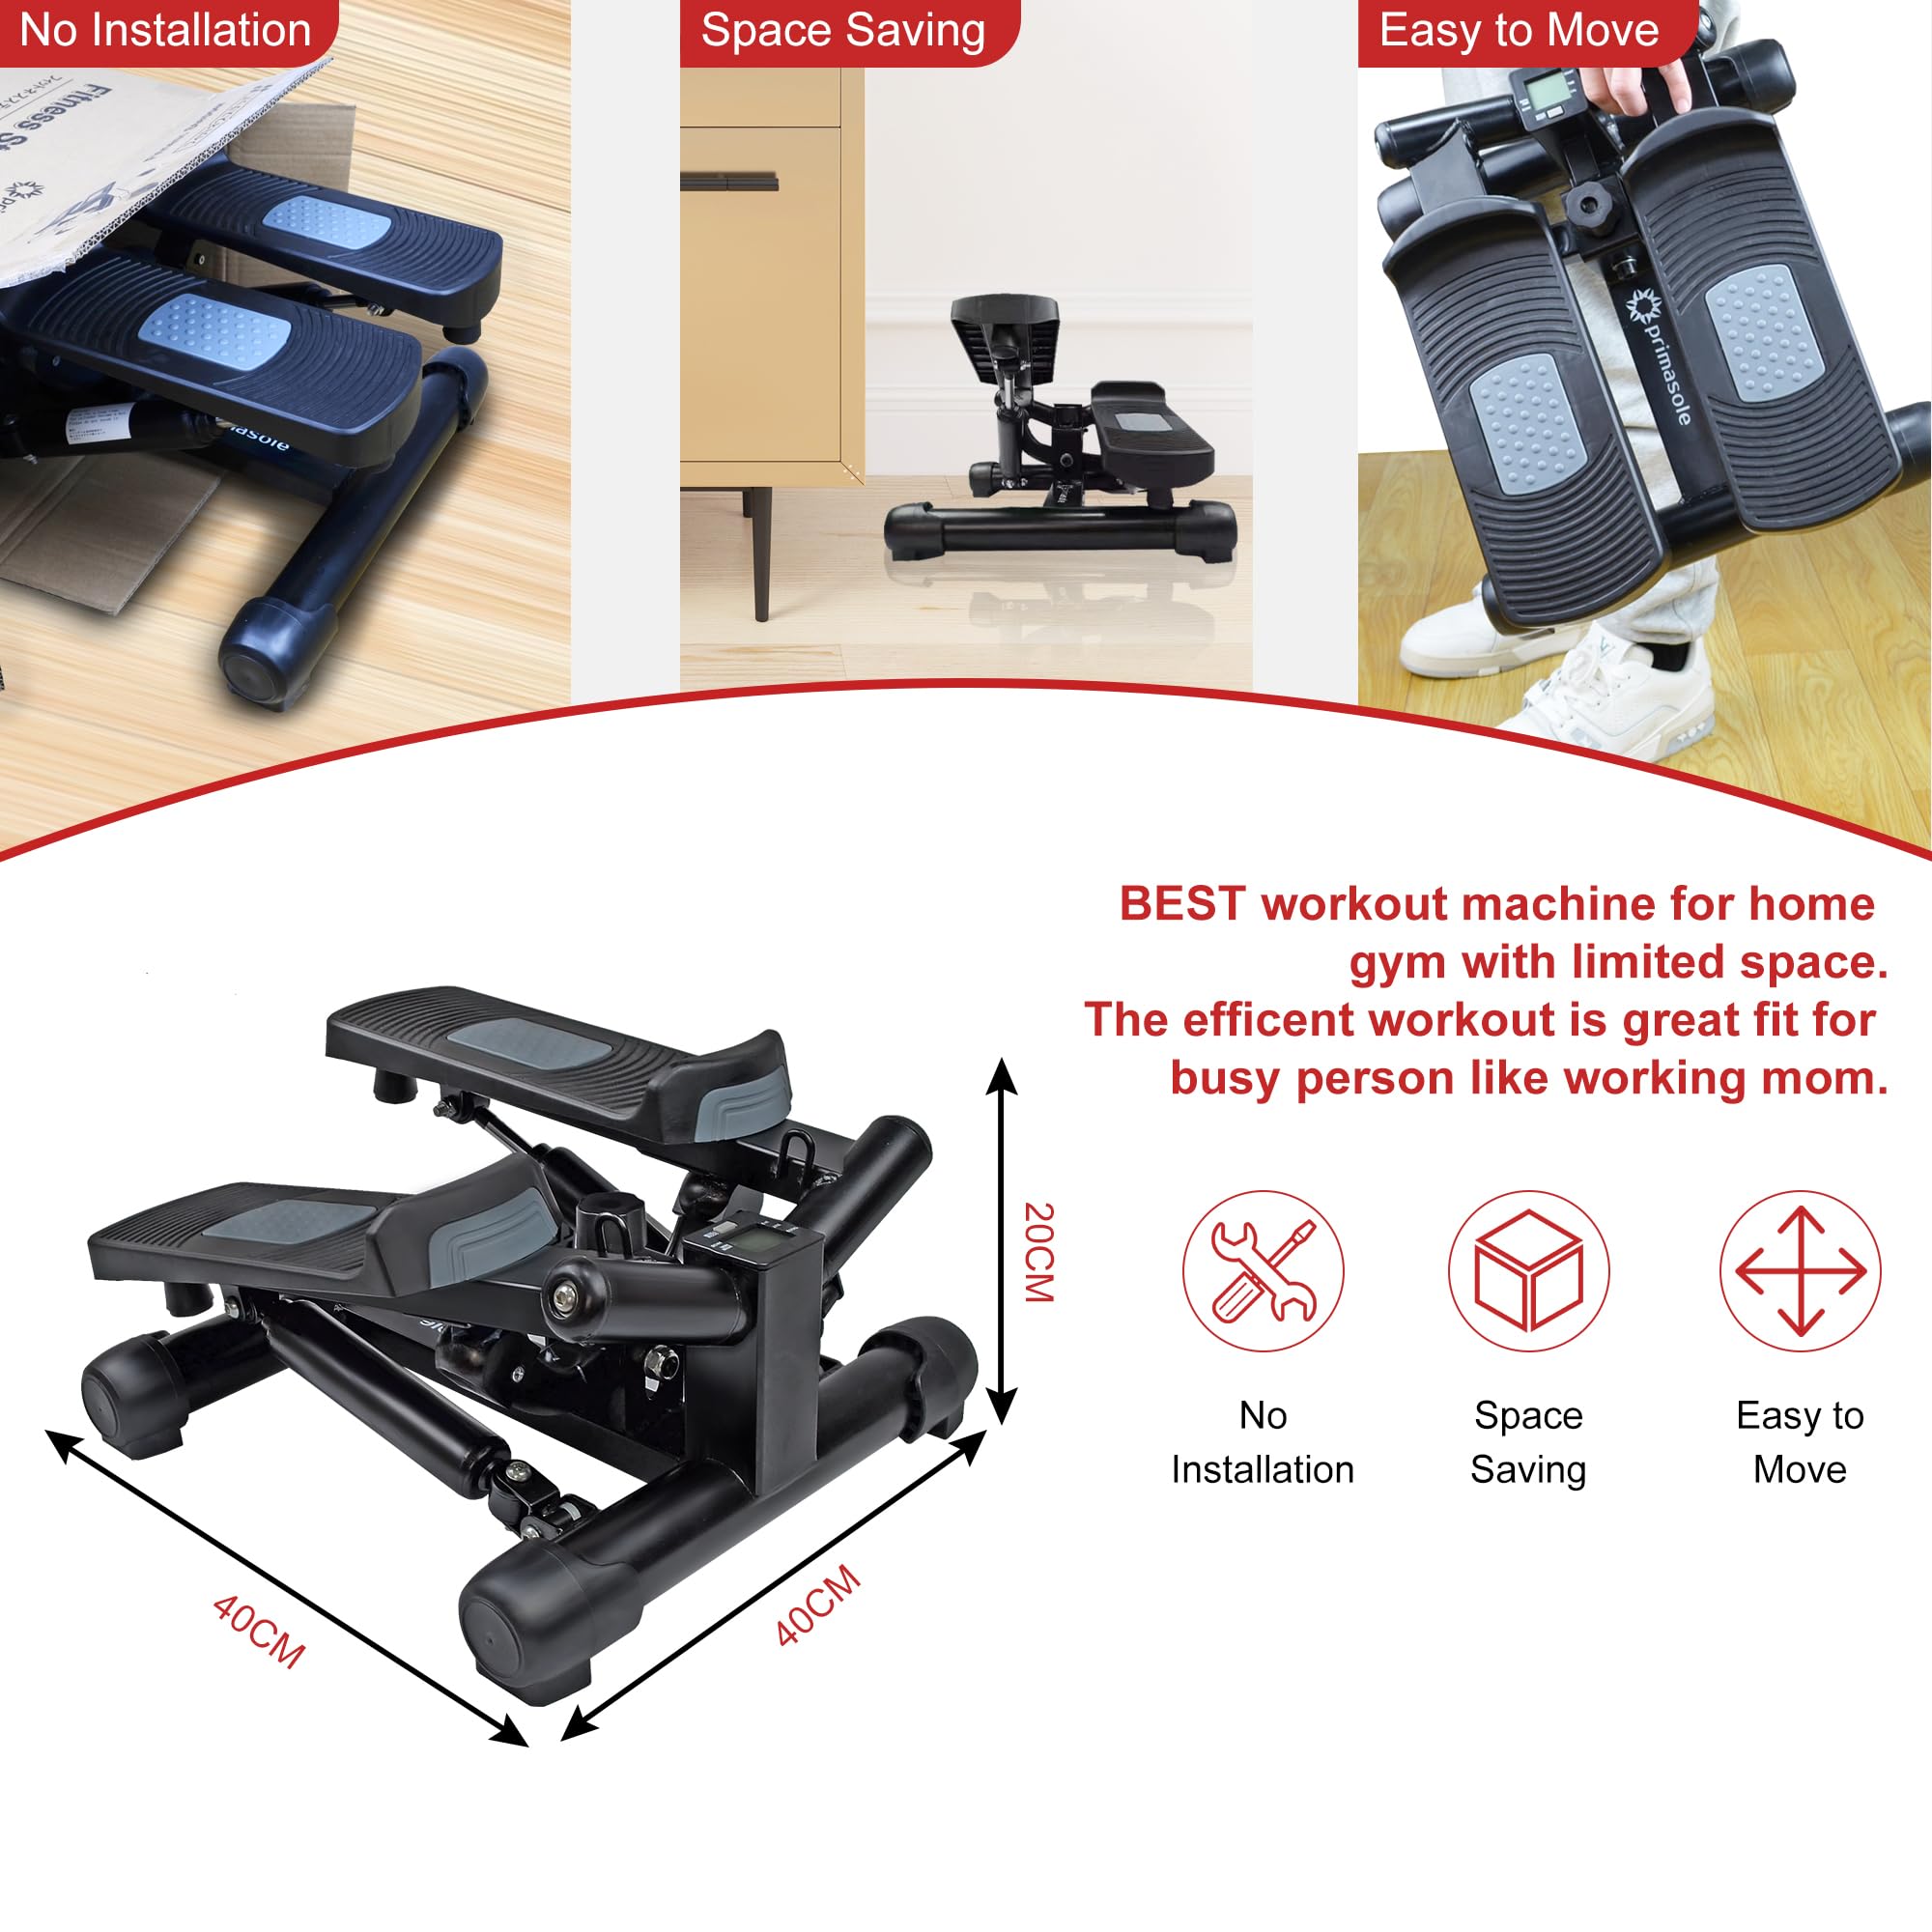 Primasole Exercise Stepper with Resistance Bands & Digital Monitor Stair Eexercise, Fitness and Workout at Home Black 300 Loading Capacity